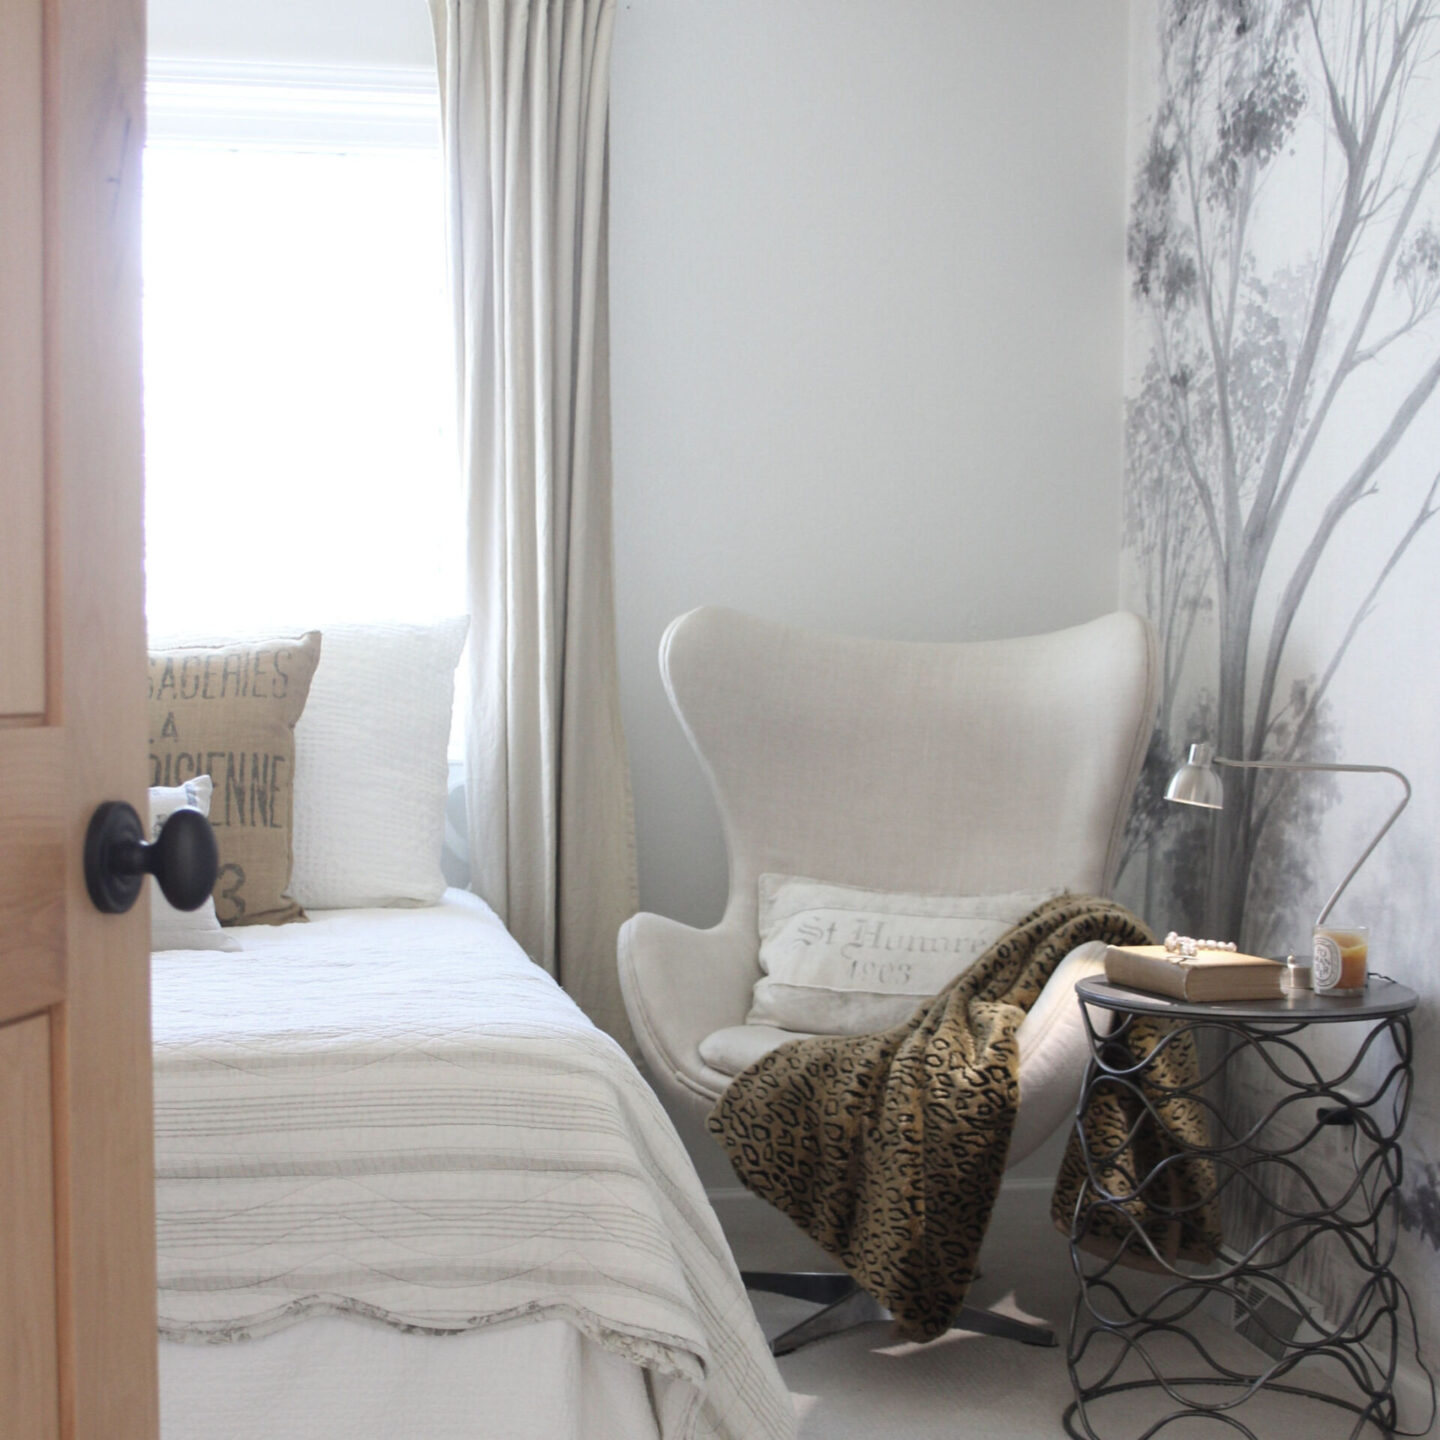 Alder door opens into a neutral bedroom with linen upholstered egg chair and grisaille mural on wall - Hello Lovely Studio. Care to learn how to decorate chic yet cheap?